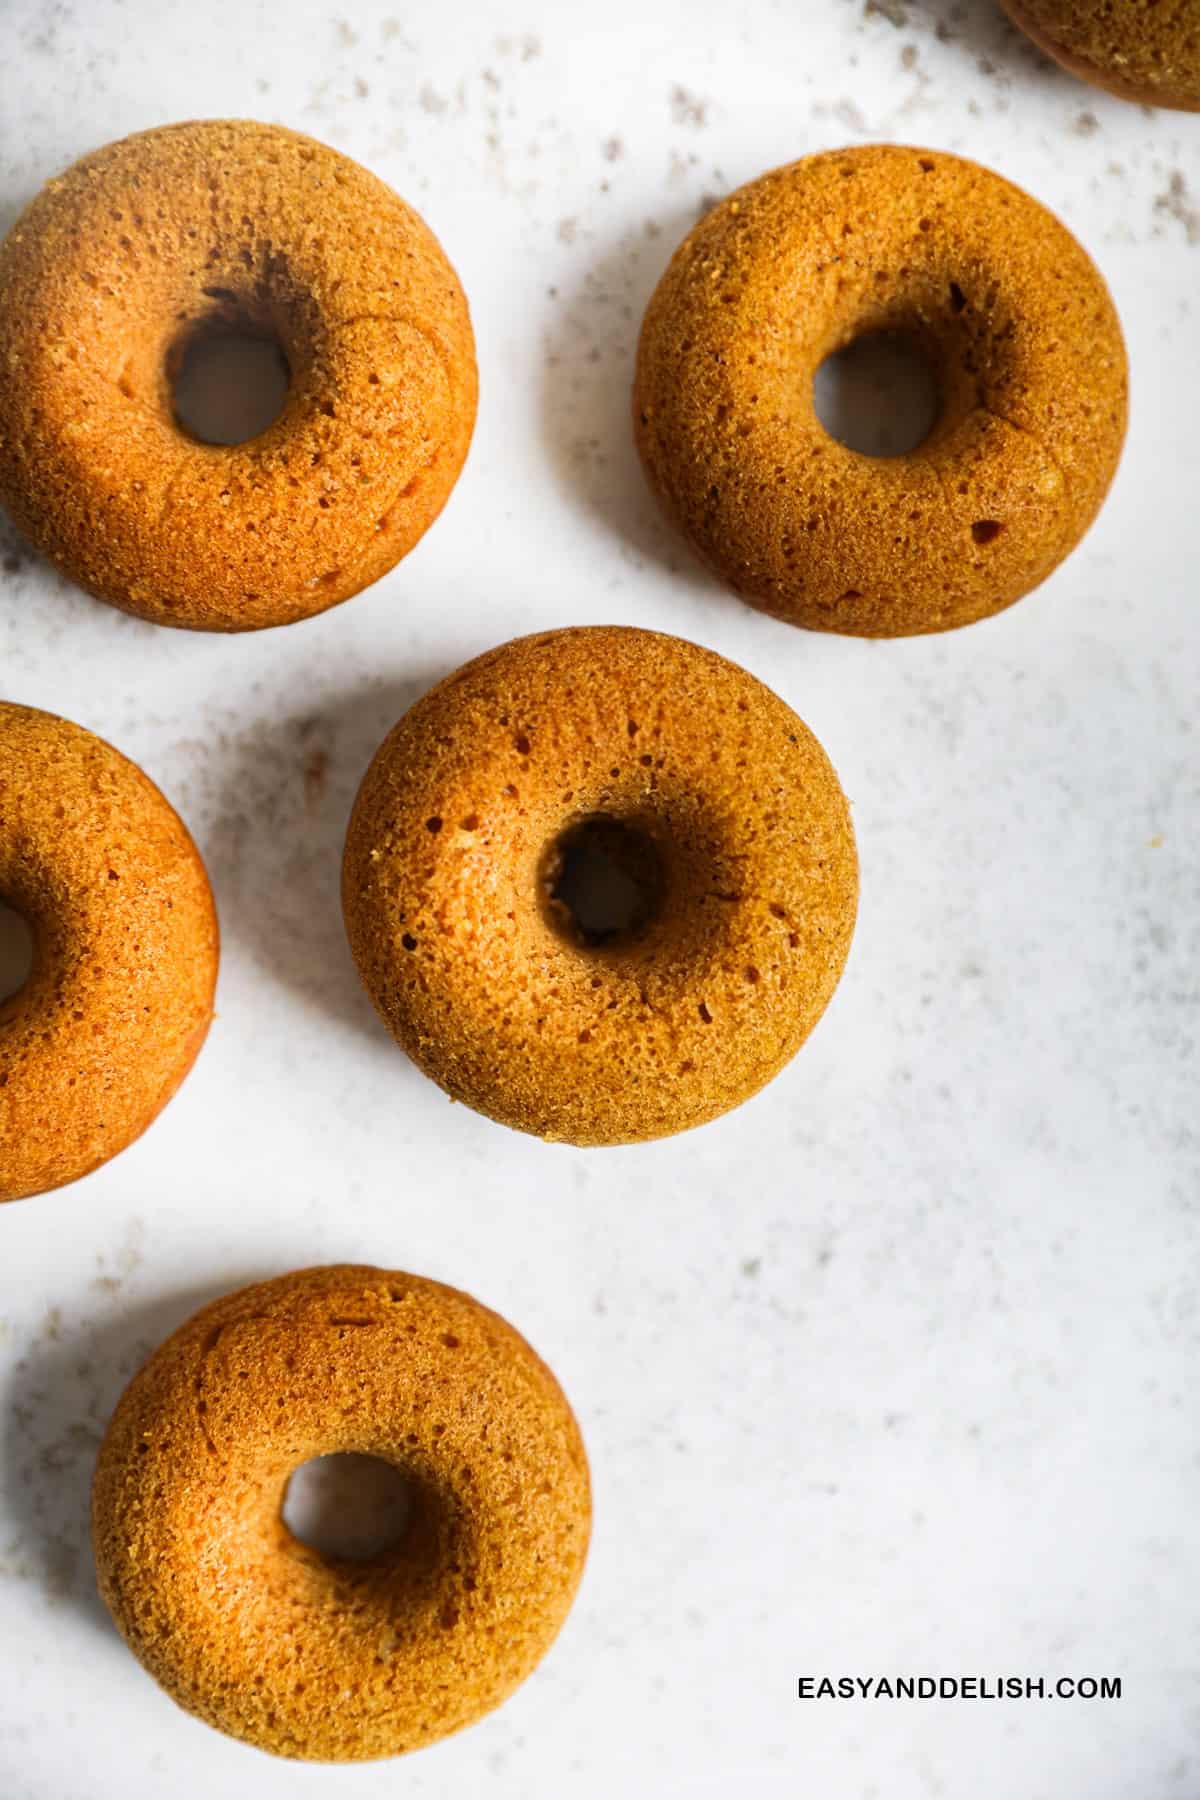 pumpkin spice donuts without the glaze spread on a table